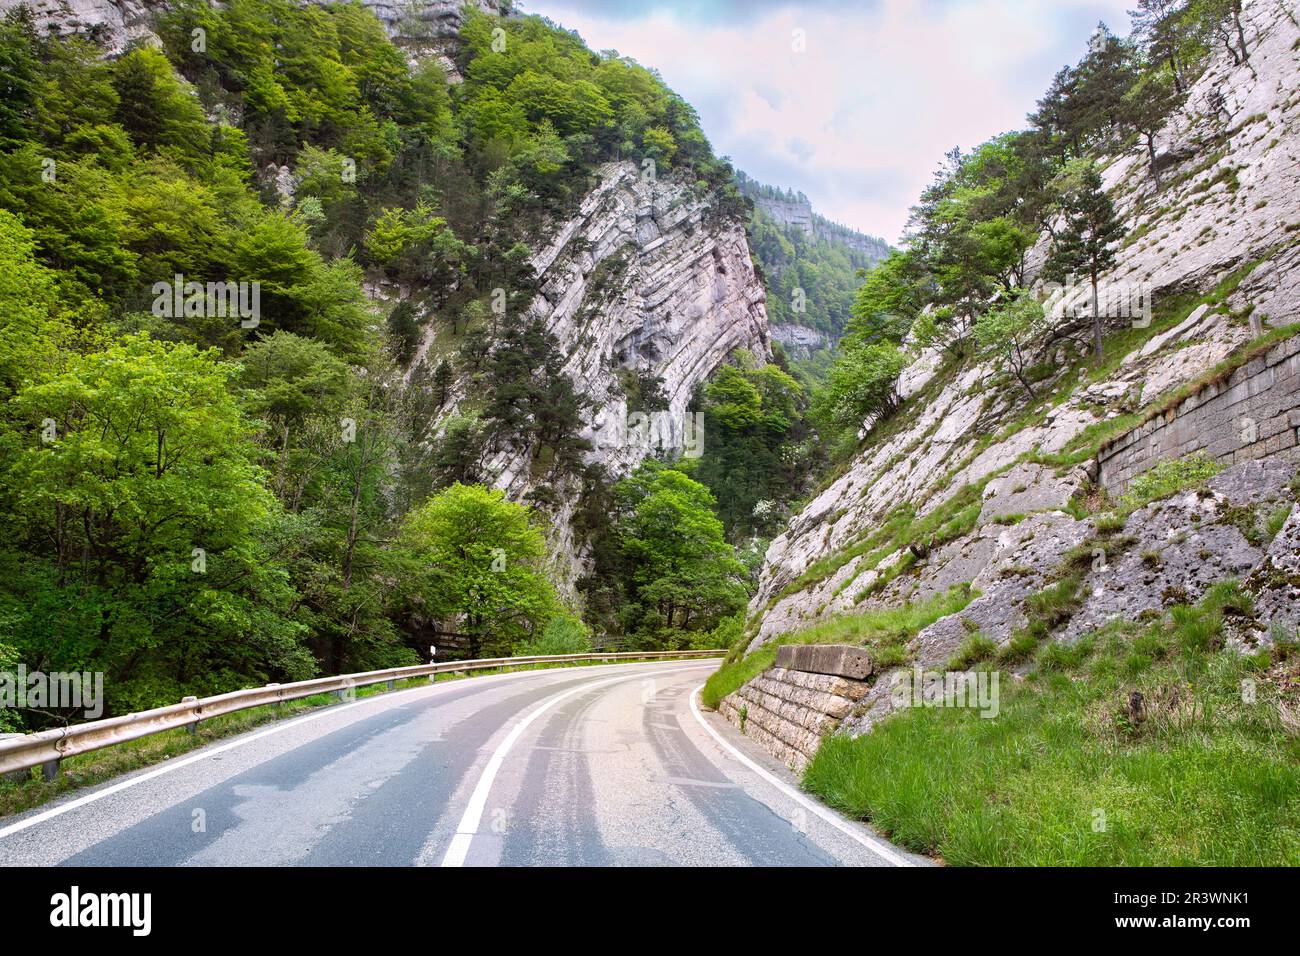 Road in rocky mountains in spring. Beautiful mountain curved roadway, trees with green foliage and overcast sky. Traveling trough landscape in Swiss J Stock Photo